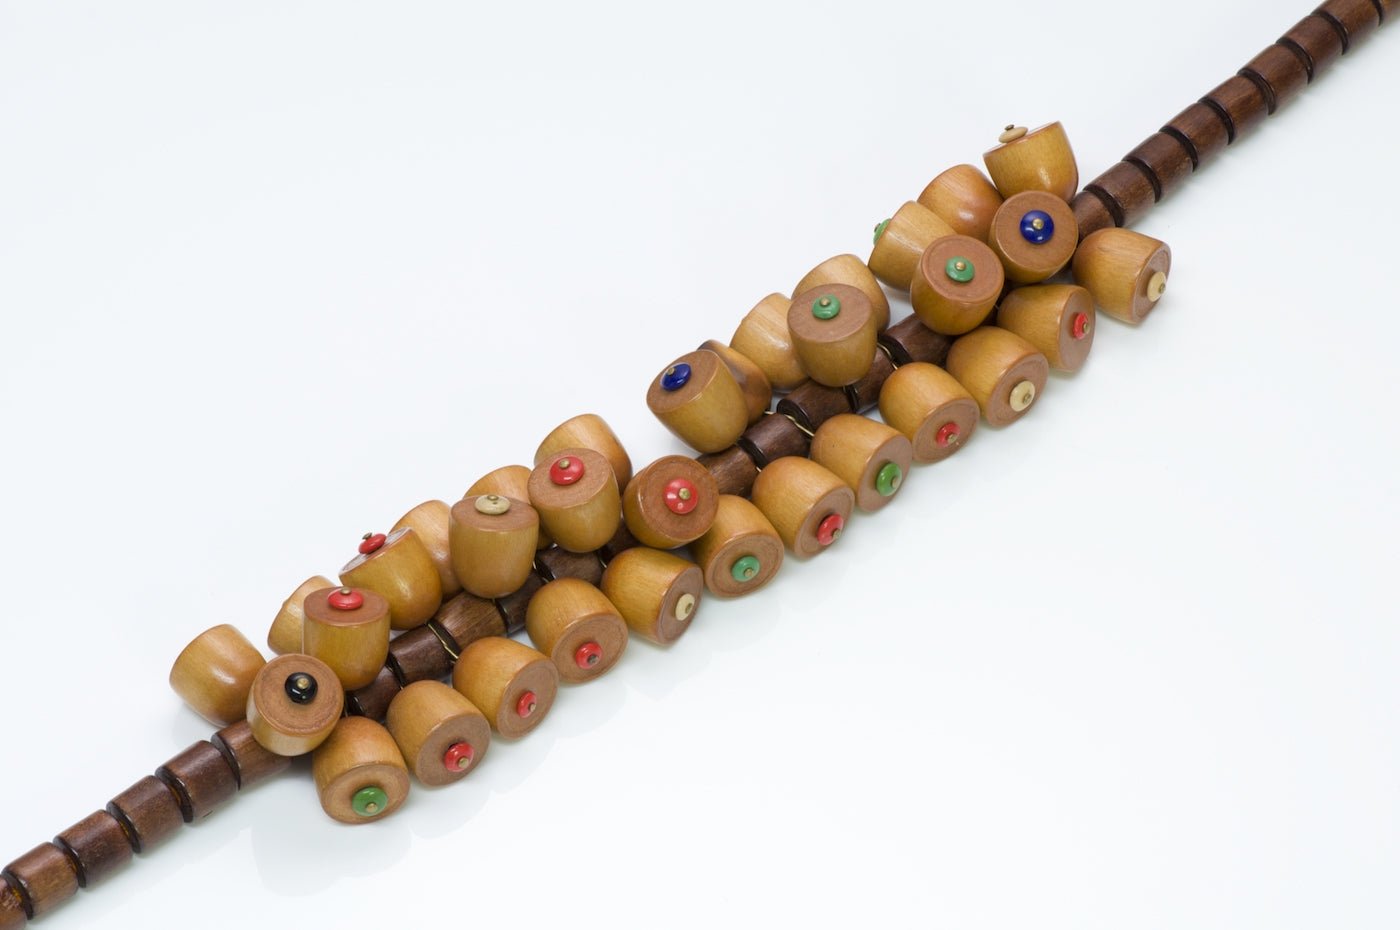 Vintage 1930's Miriam Haskell Wood Necklace